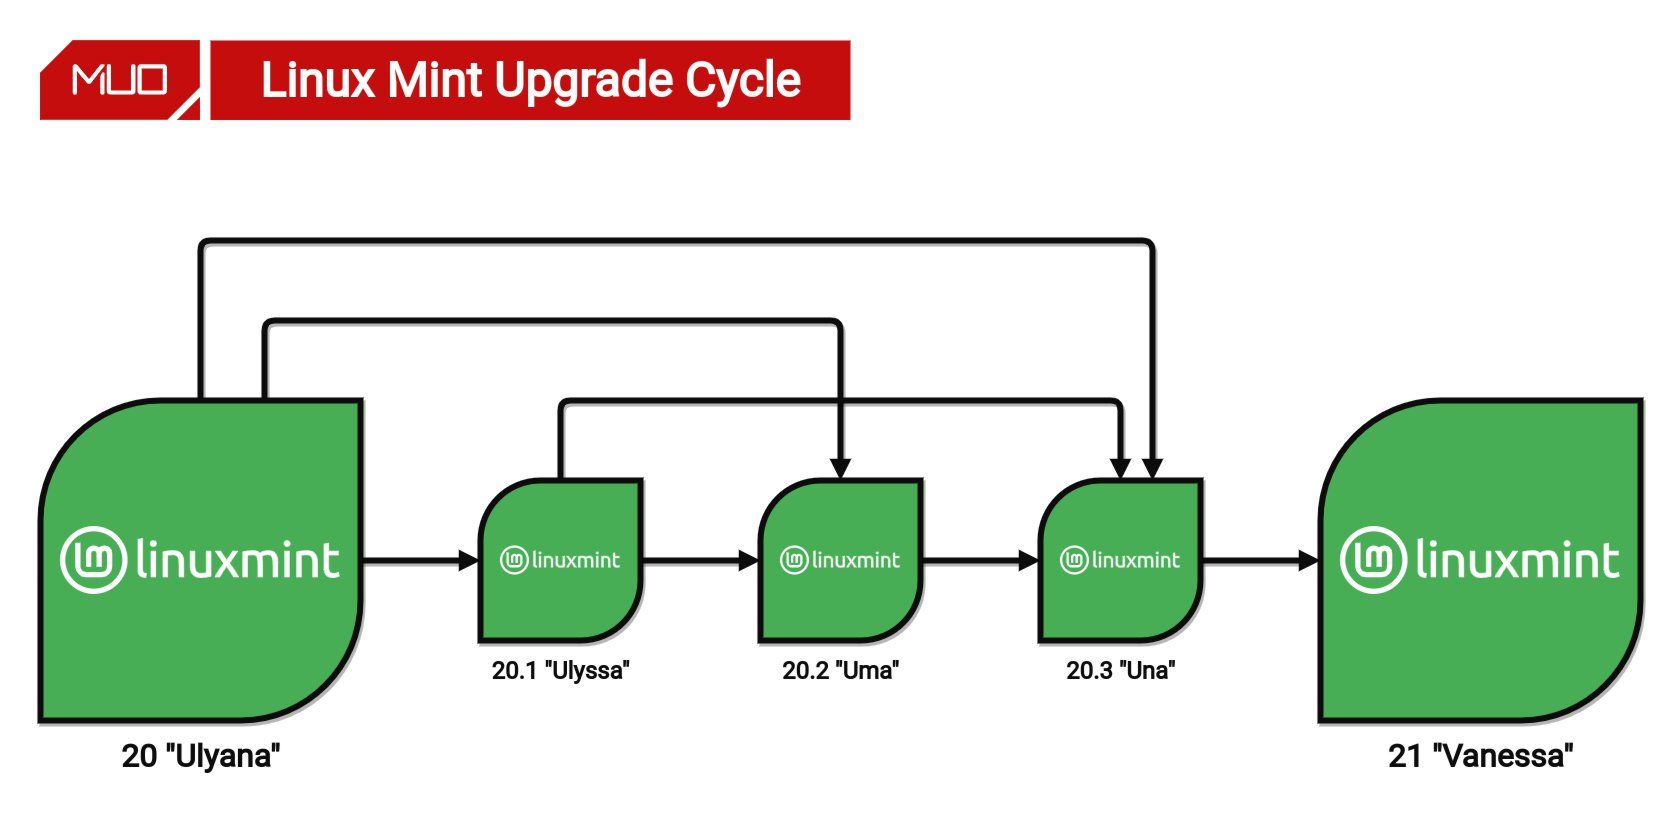 Flowchart showing various Linux Mint 21 upgrade paths.